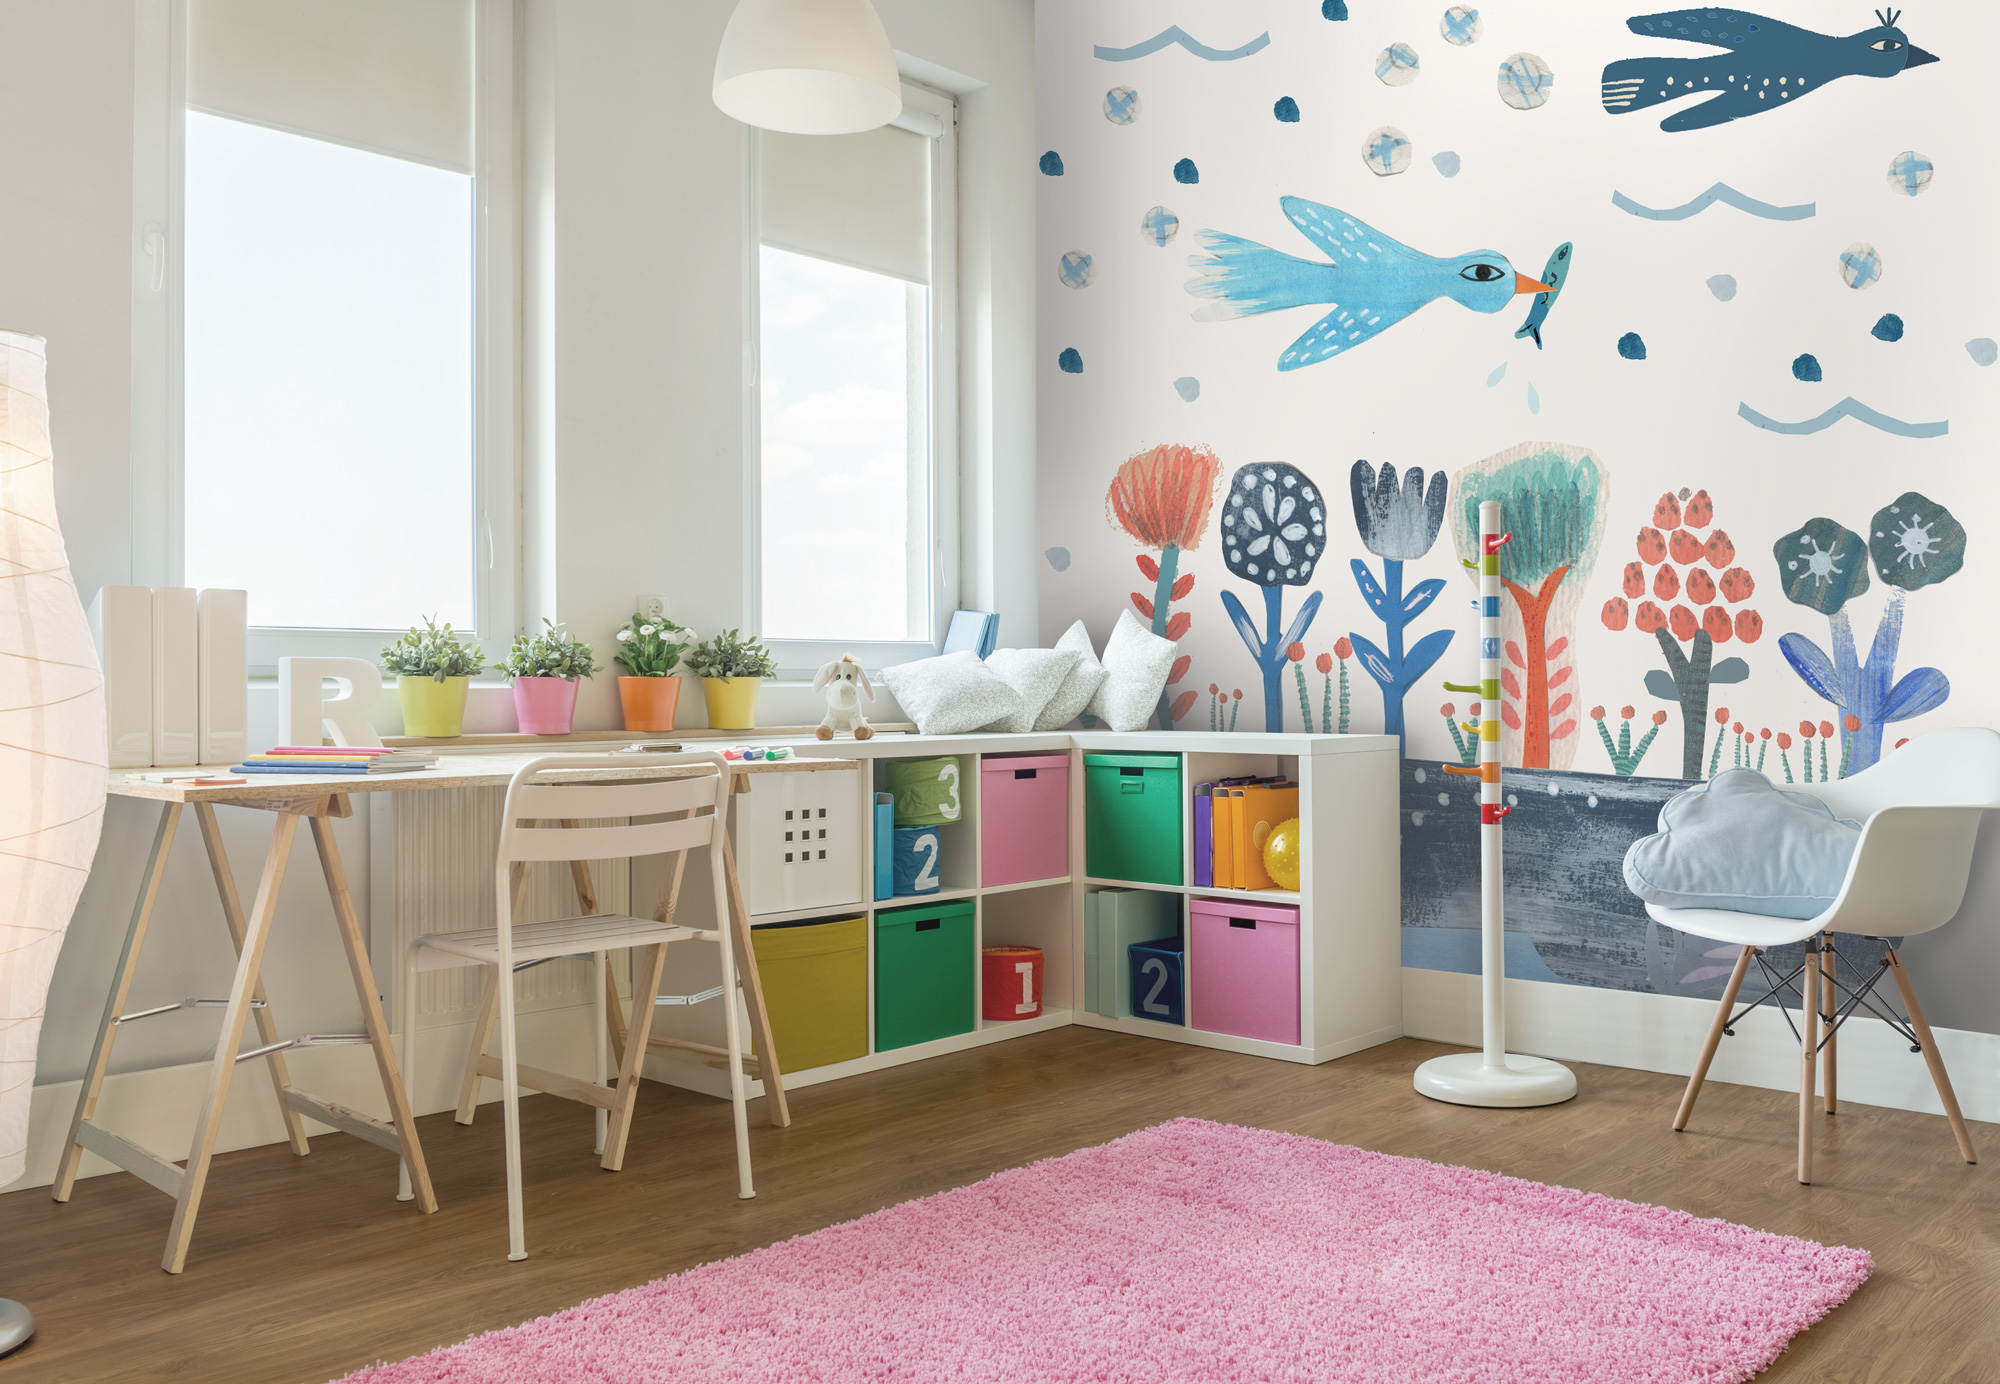 bird wallpaper in blue and red tones in kids bedroom with colourful shelves